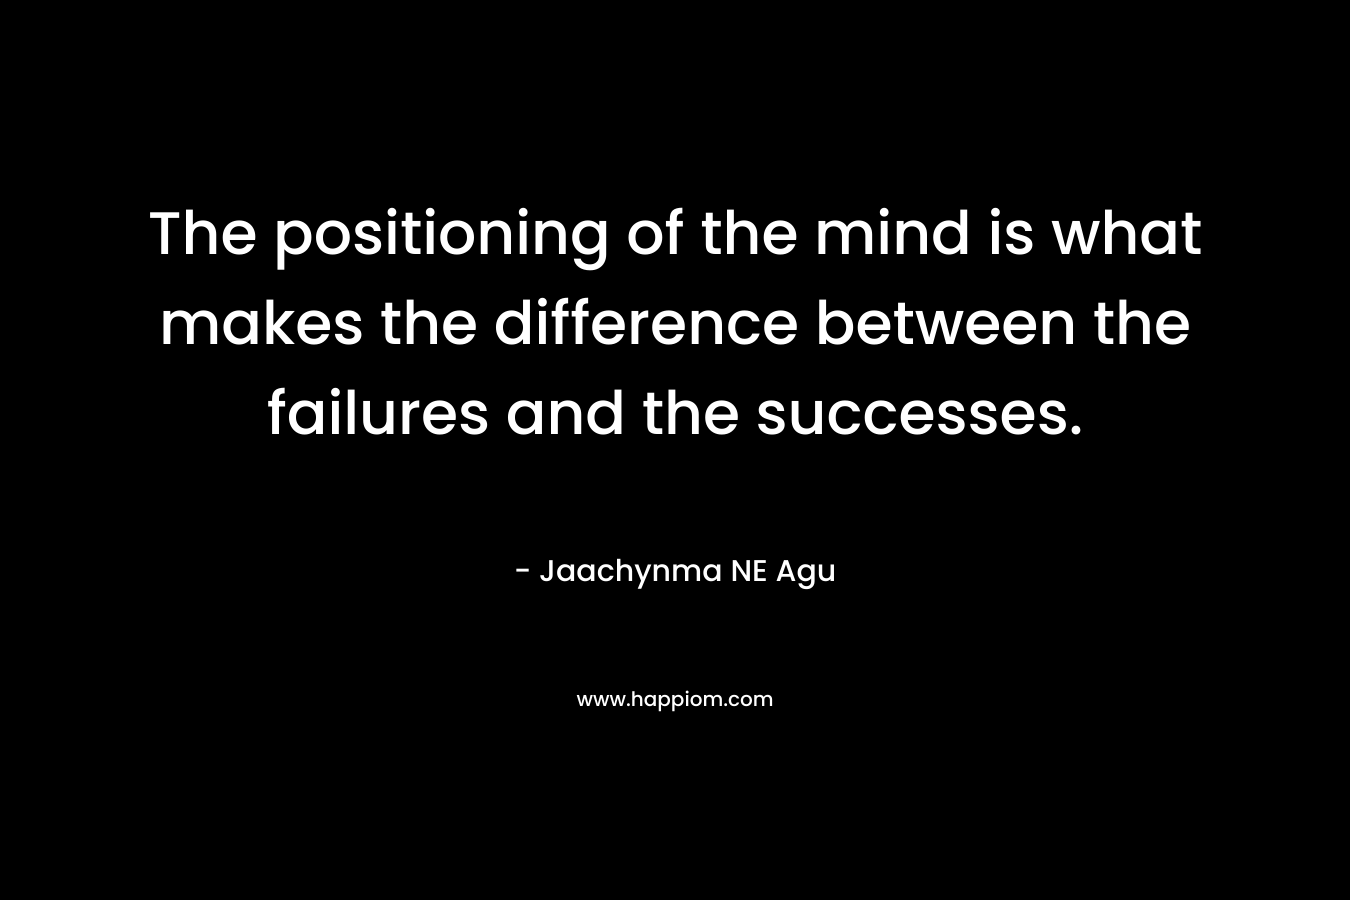 The positioning of the mind is what makes the difference between the failures and the successes.